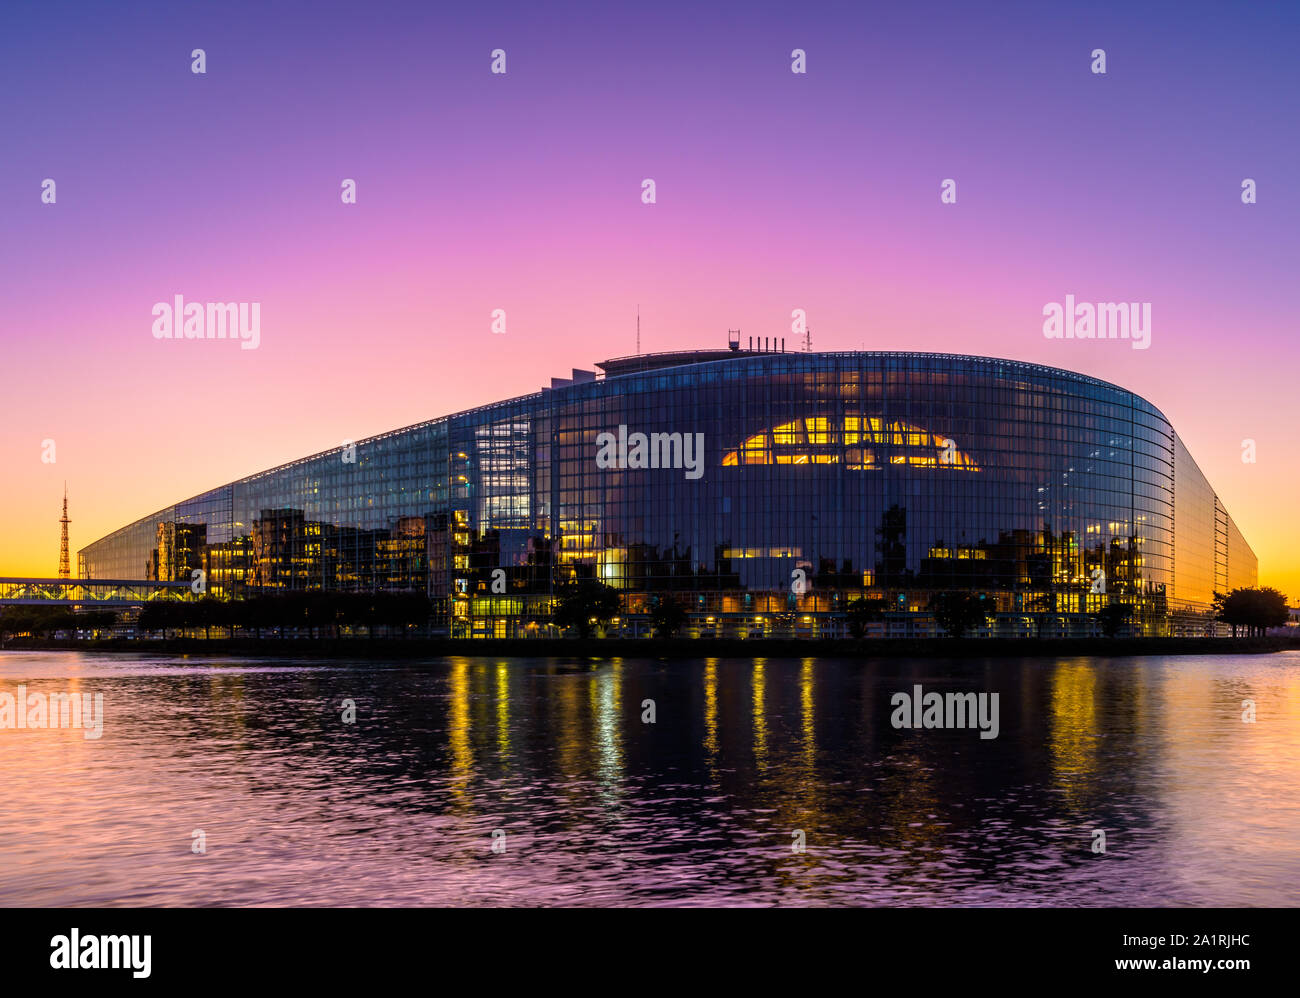 Twilight view in a purple light of the eastern glass facade of the Louise Weiss building,  seat of the European Parliament in Strasbourg, France. Stock Photo